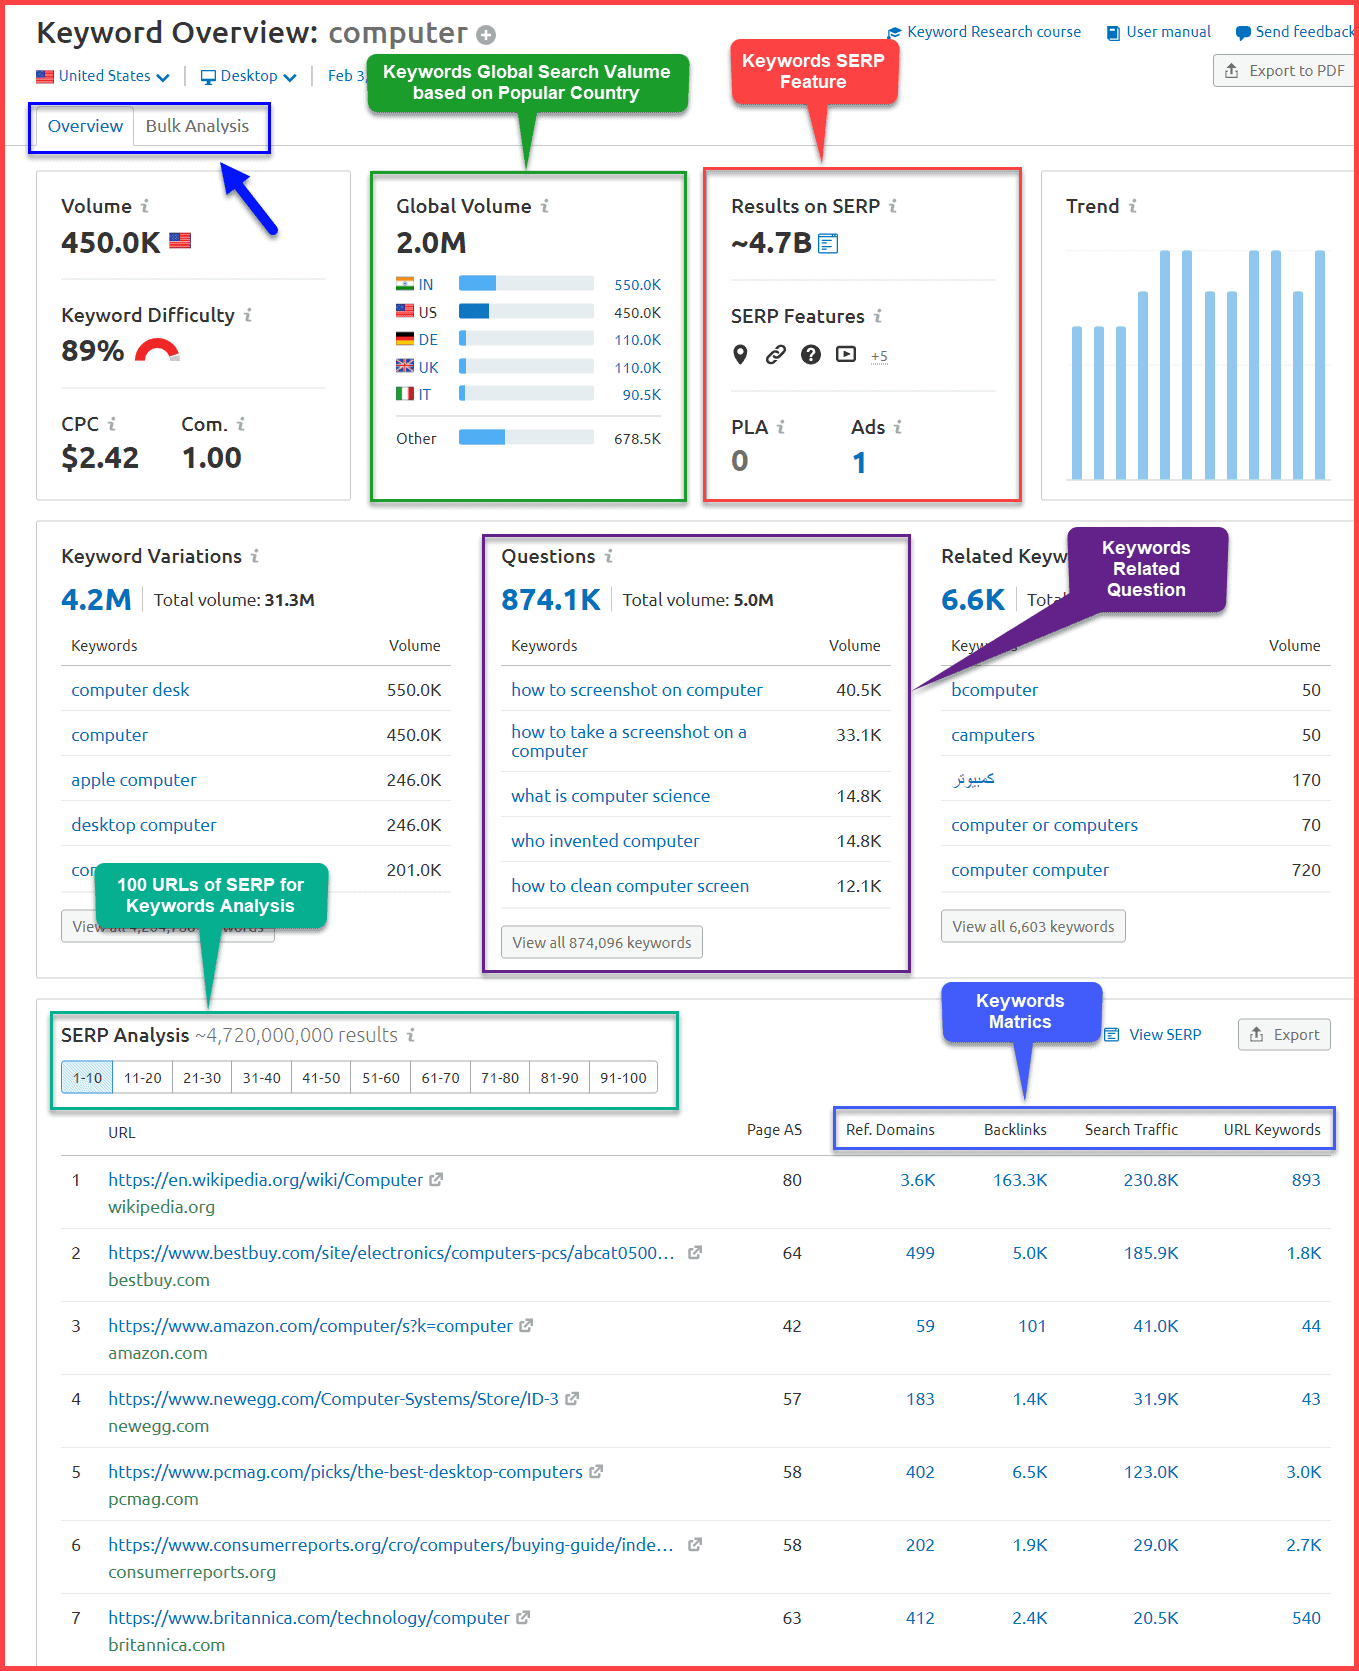 Keyword Overview